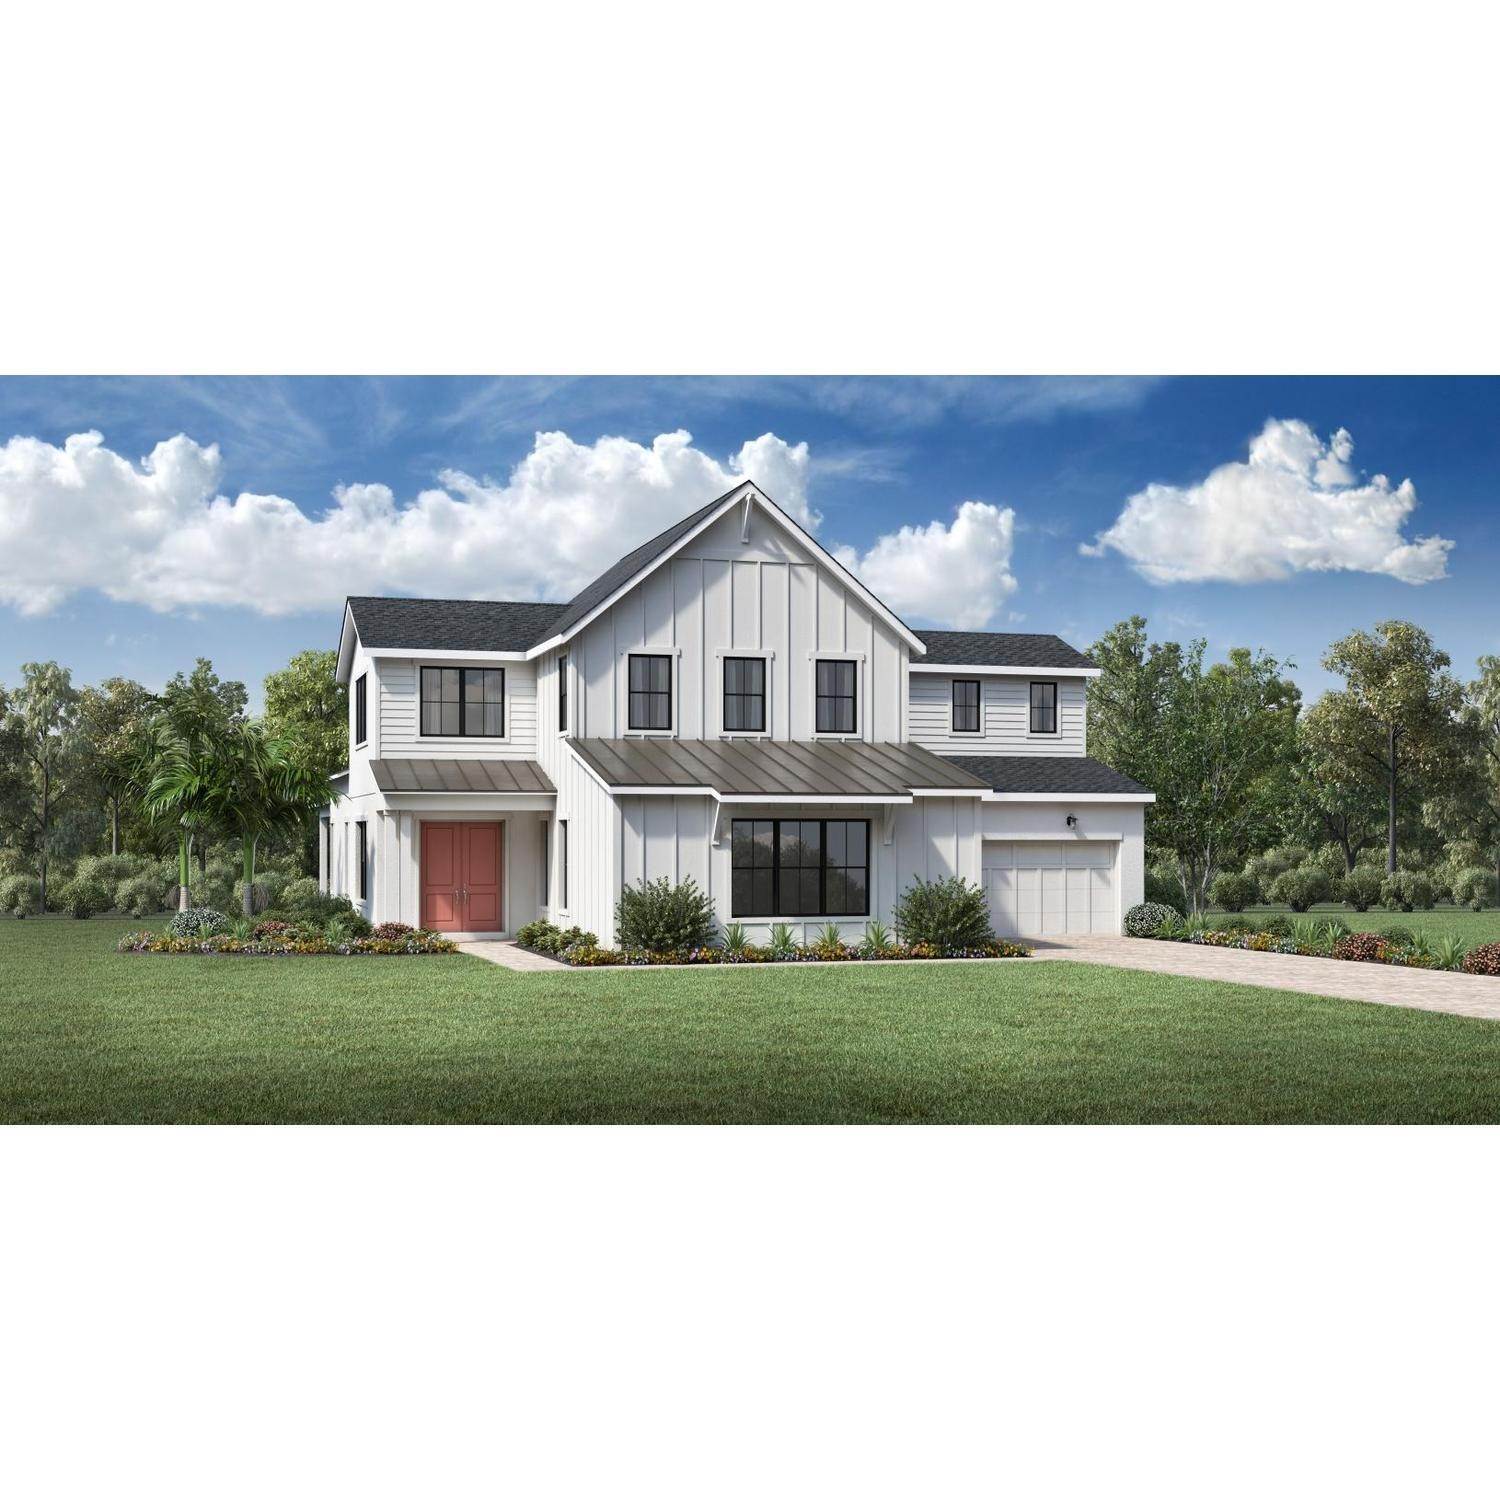 Single Family for Sale at Narcoossee Rd & Luminary Blvd Narcoossee Rd & Luminary Blvd, Orlando, FL 32832